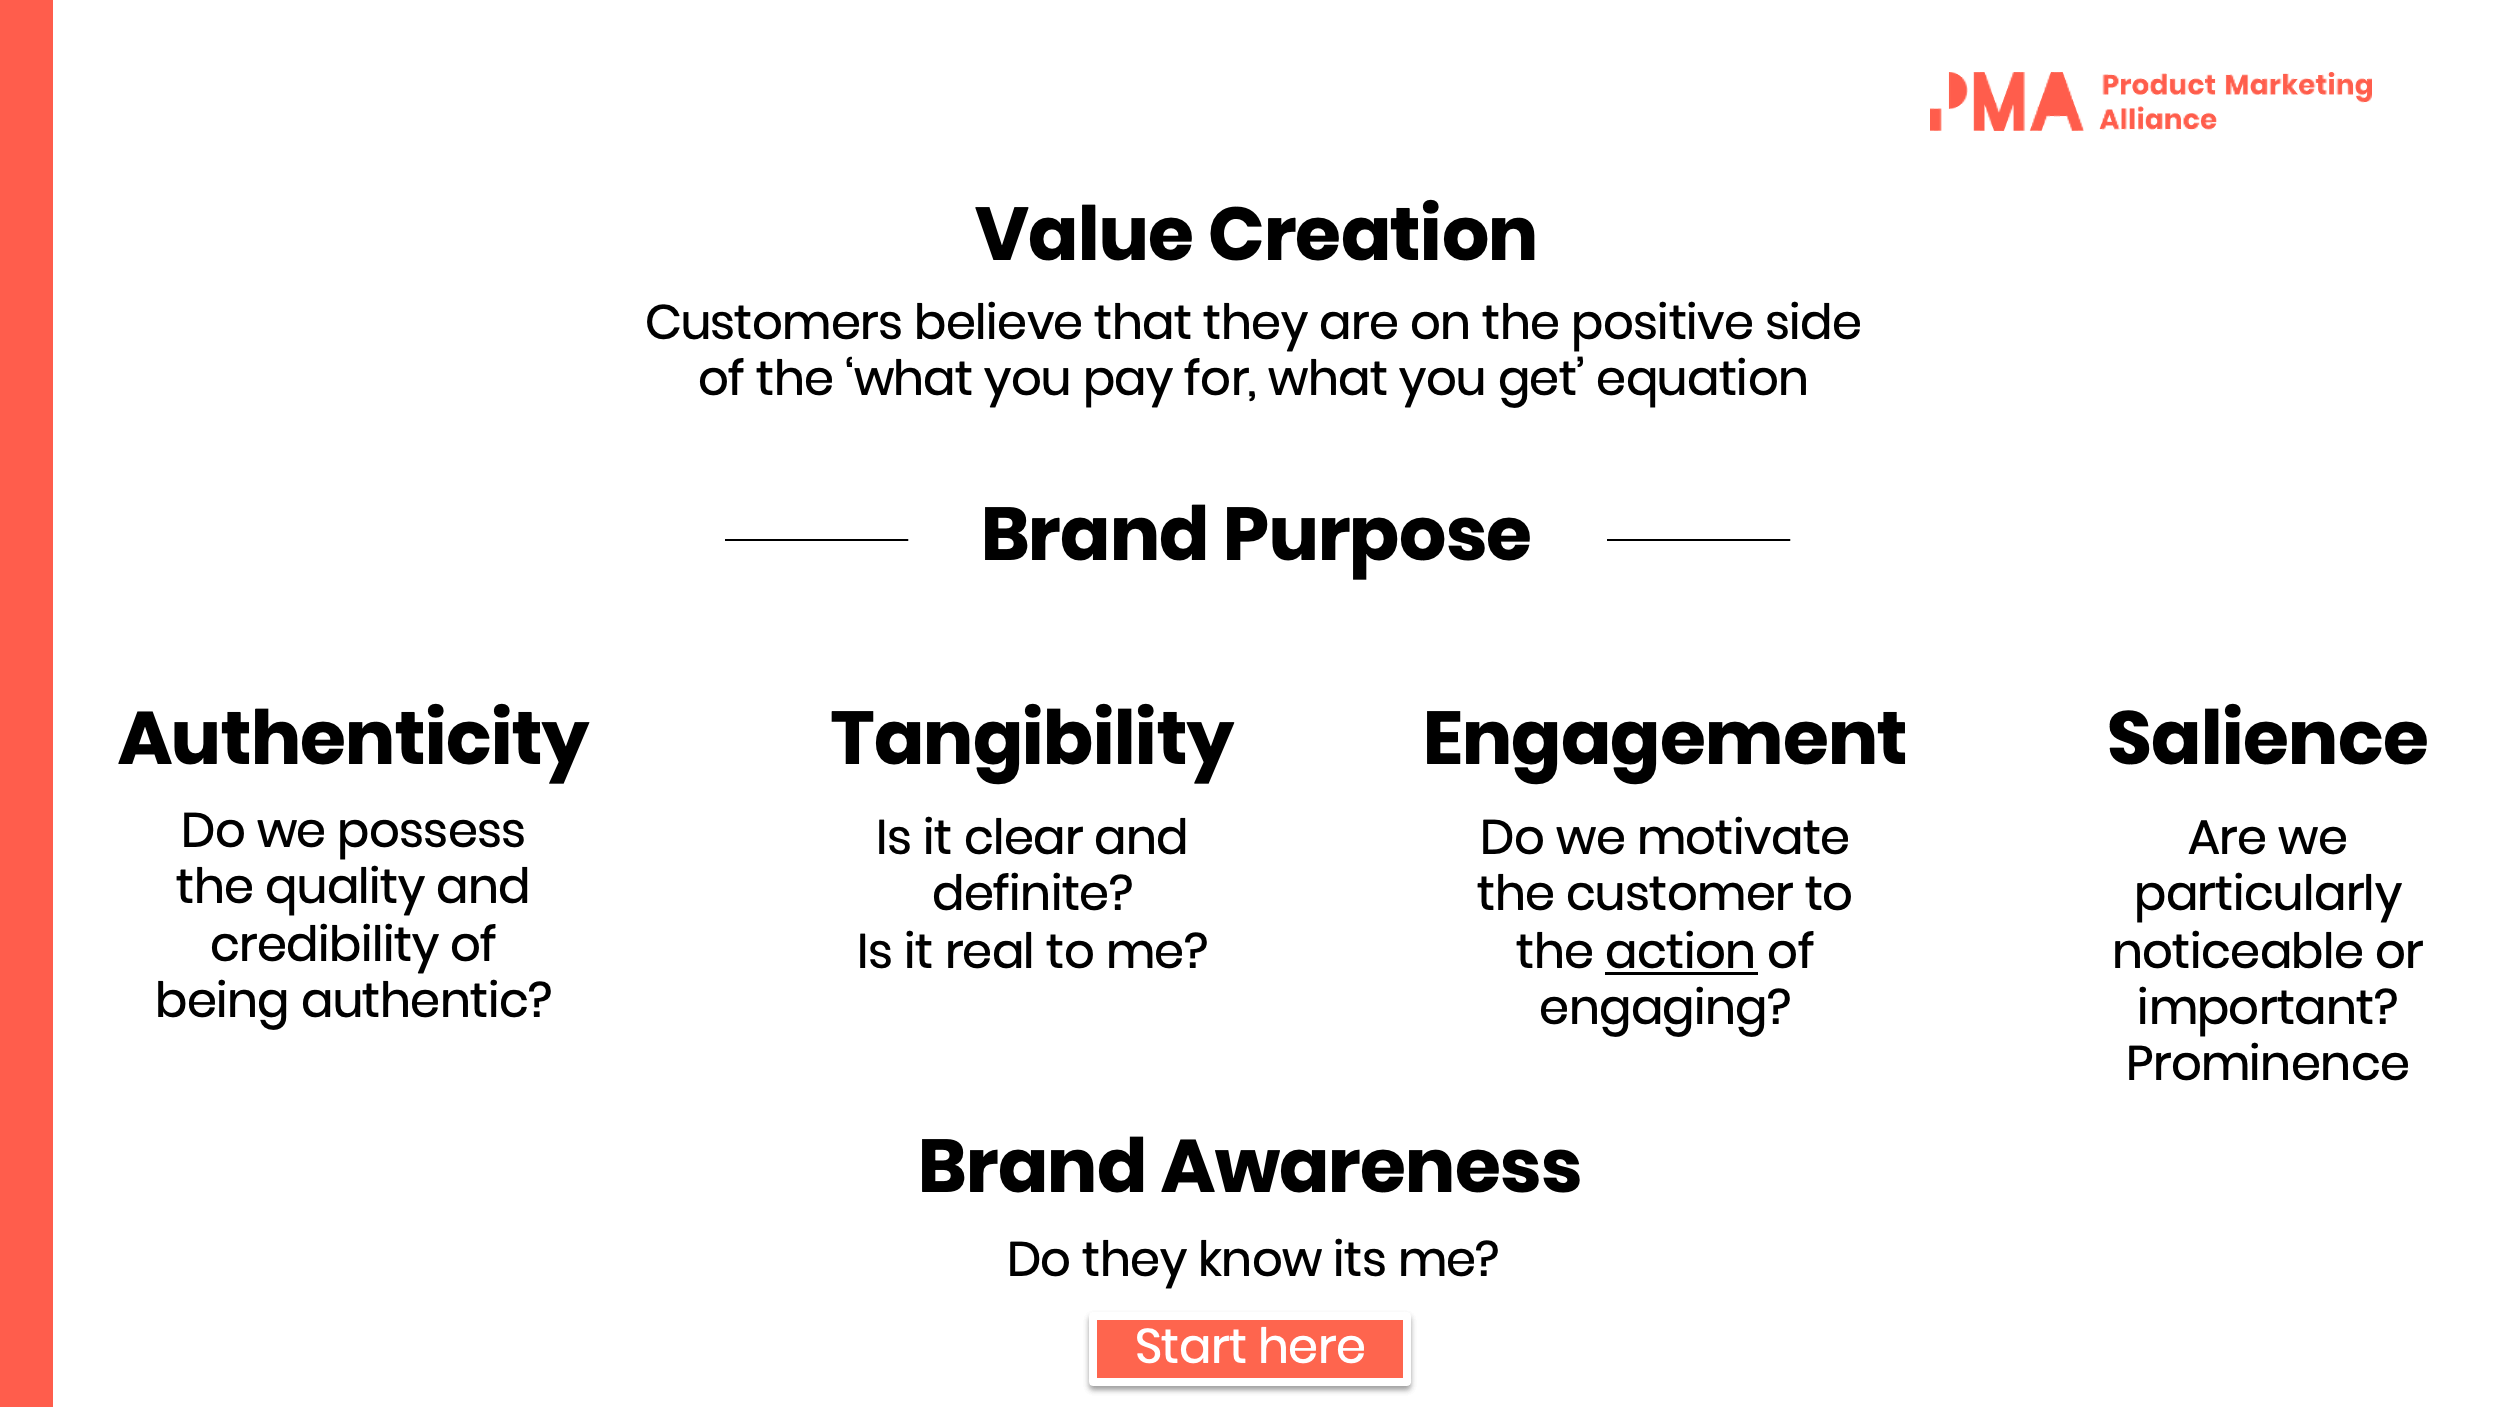 An image from Product Marketing Alliance that says "Value Creation - Customers believe that they are on the positive side of the 'what you pay for, what you get' equation. Then underneath, it says "Brand Purpose" with five subheadings which state: "Authenticity - do we possess the quality and credibility of being authentic?" "Tangibility - is it clear and definite? Is it real to me?", "Engagement - do we motivate the customer to the action of engaging?', "Salience - are we particularly noticeable or important? Prominence" and finally "Brand awareness - do they know it's me?".